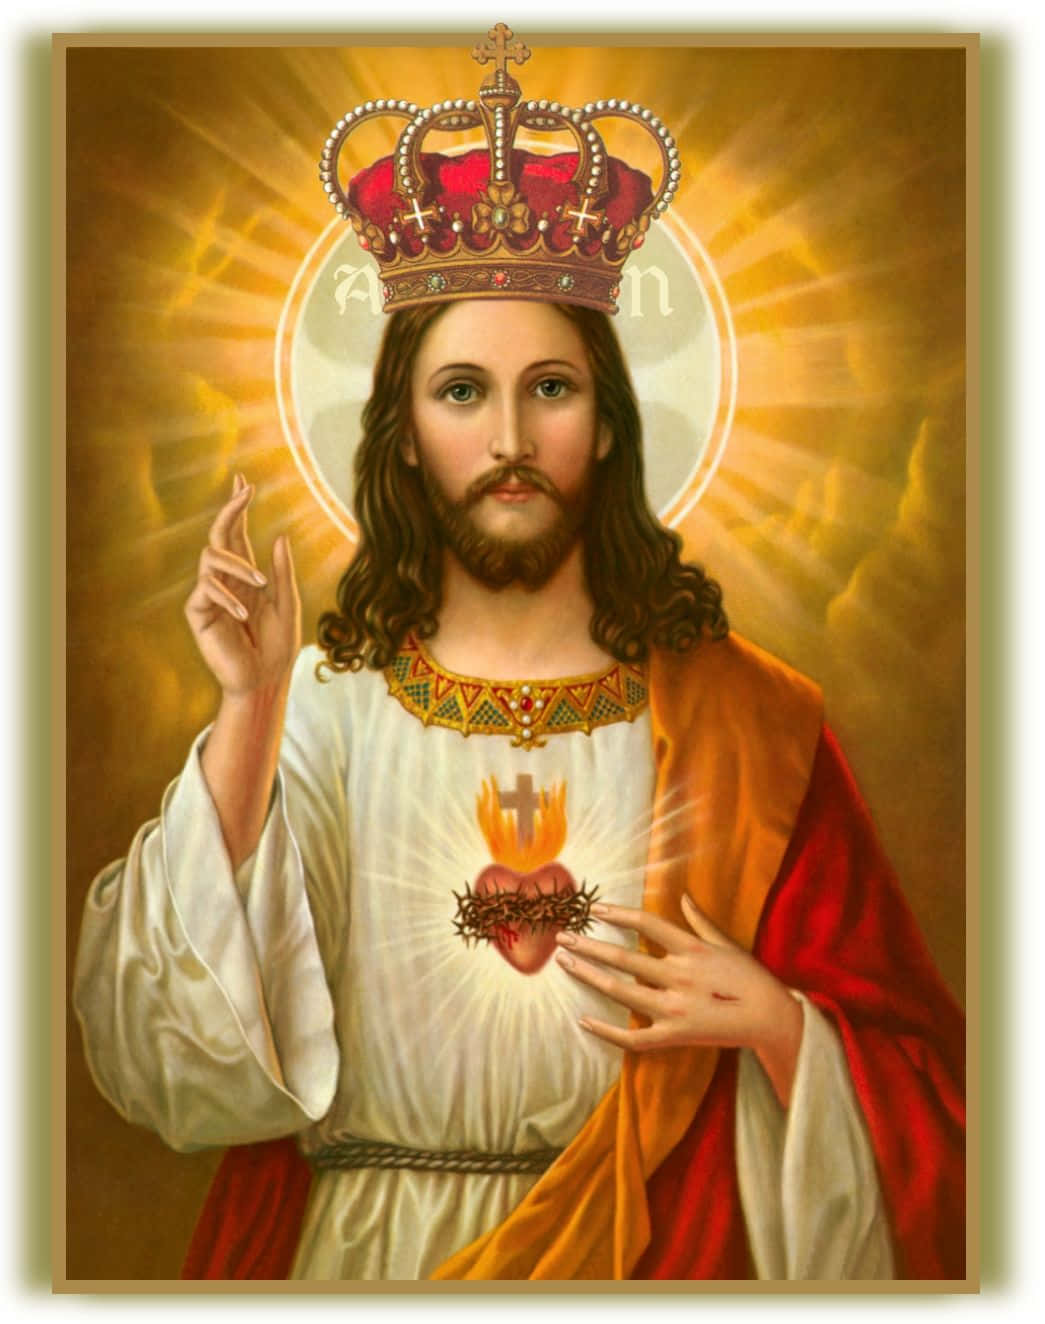 Discover the divine power of Jesus Is King Wallpaper